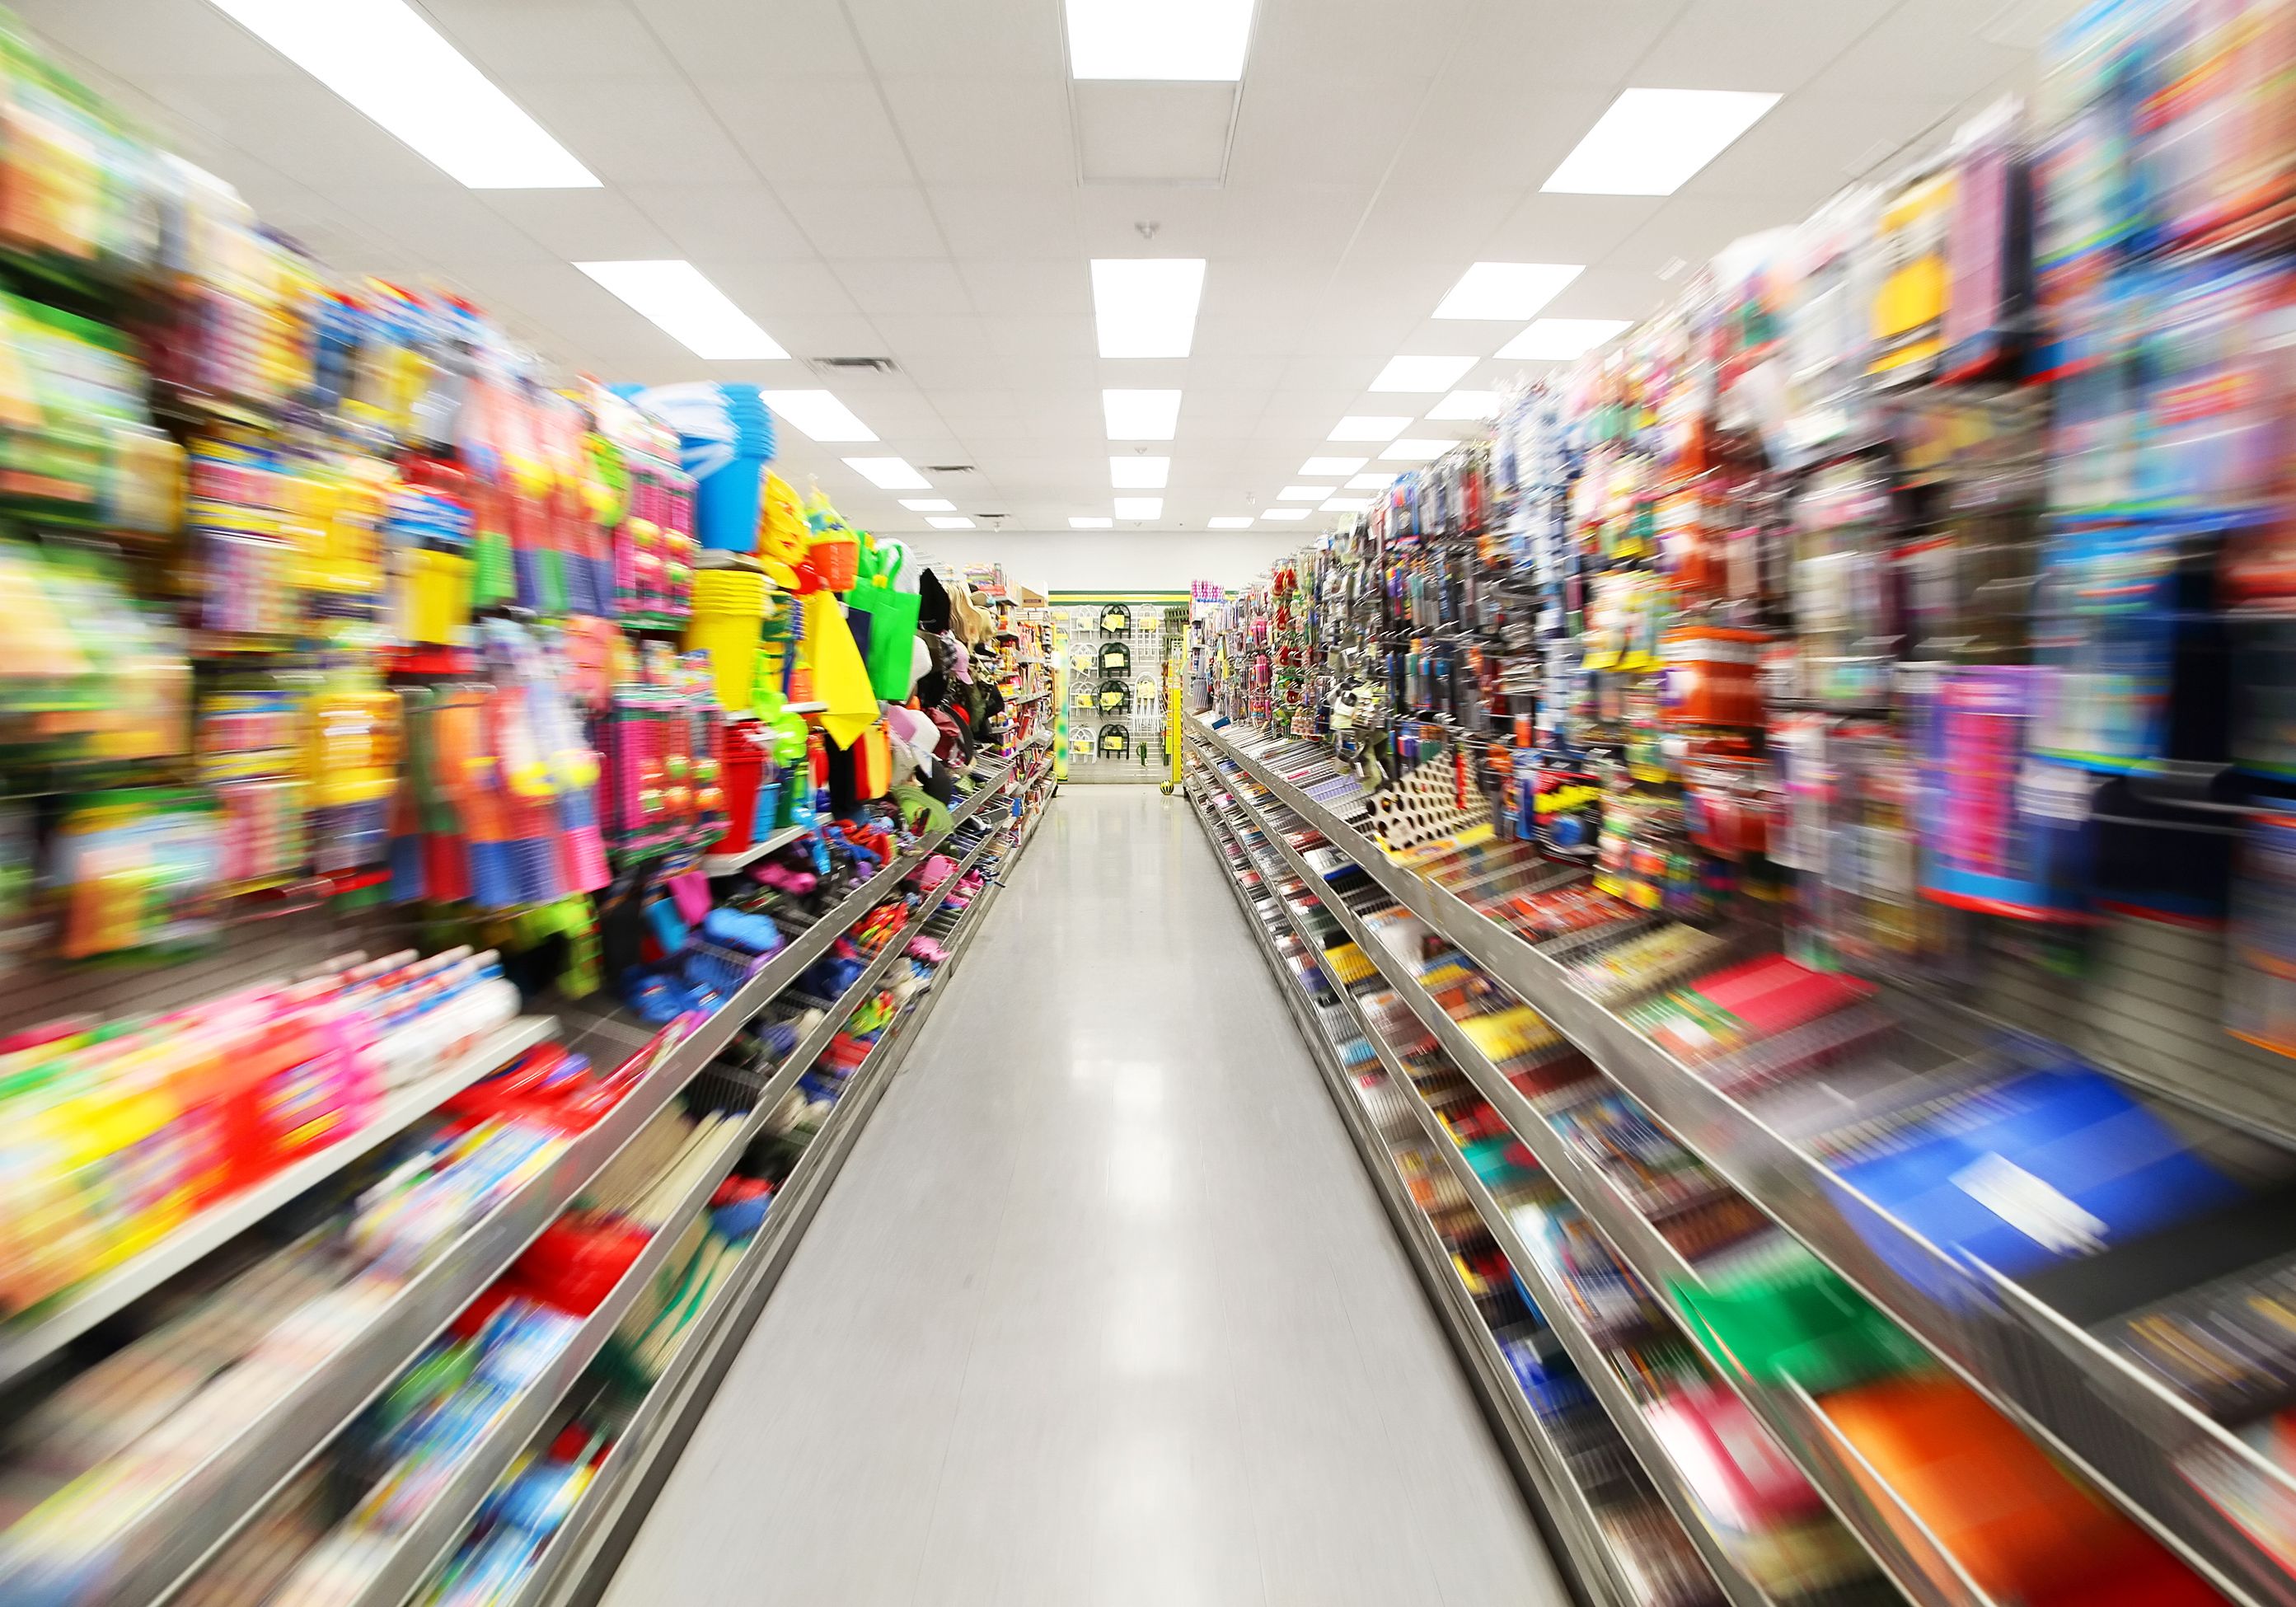 Is Dollar General A Franchise In 2022? (All You Need To Know)